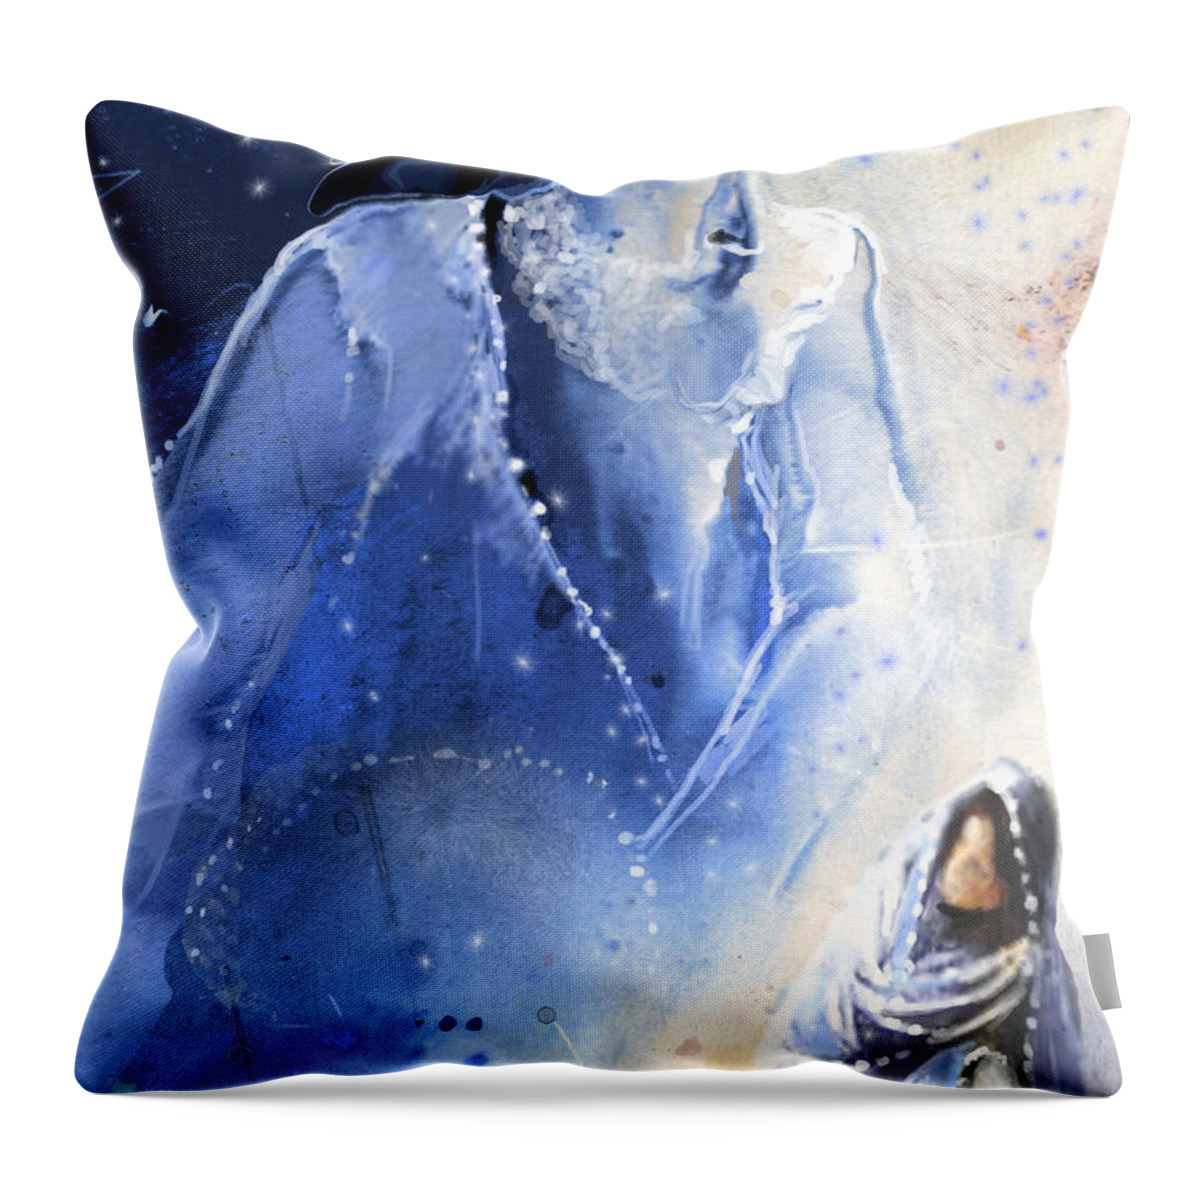 Fantasy Throw Pillow featuring the painting Mary Magdalene by Miki De Goodaboom